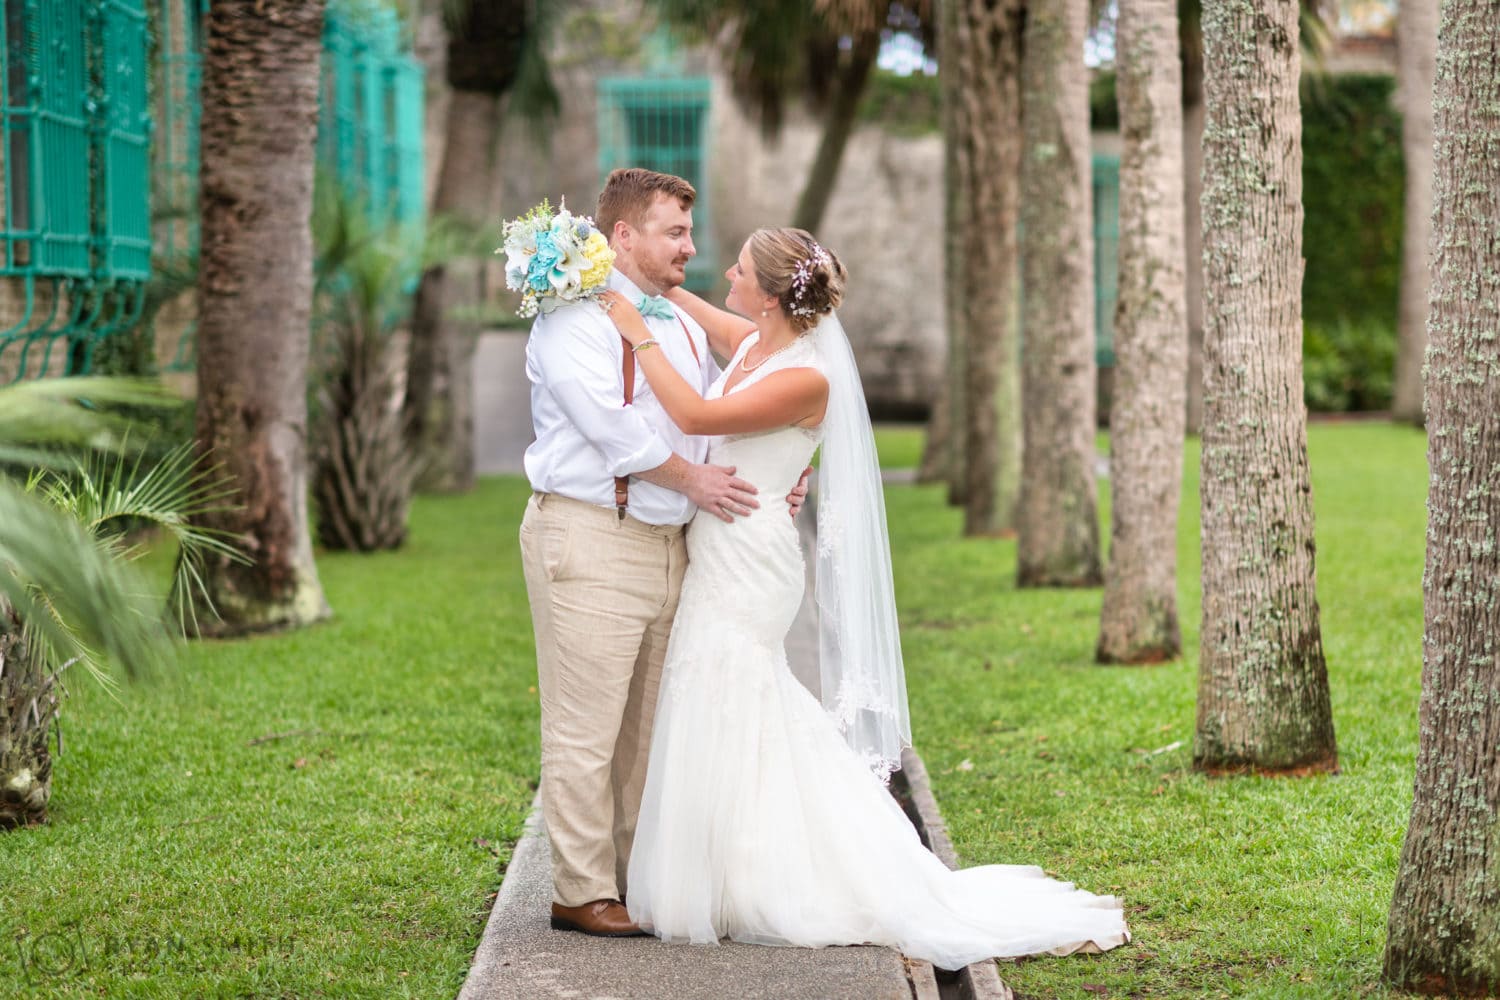 Bride and groom by the palms in the courtyard - Atalaya Castle - Huntington Beach State Park